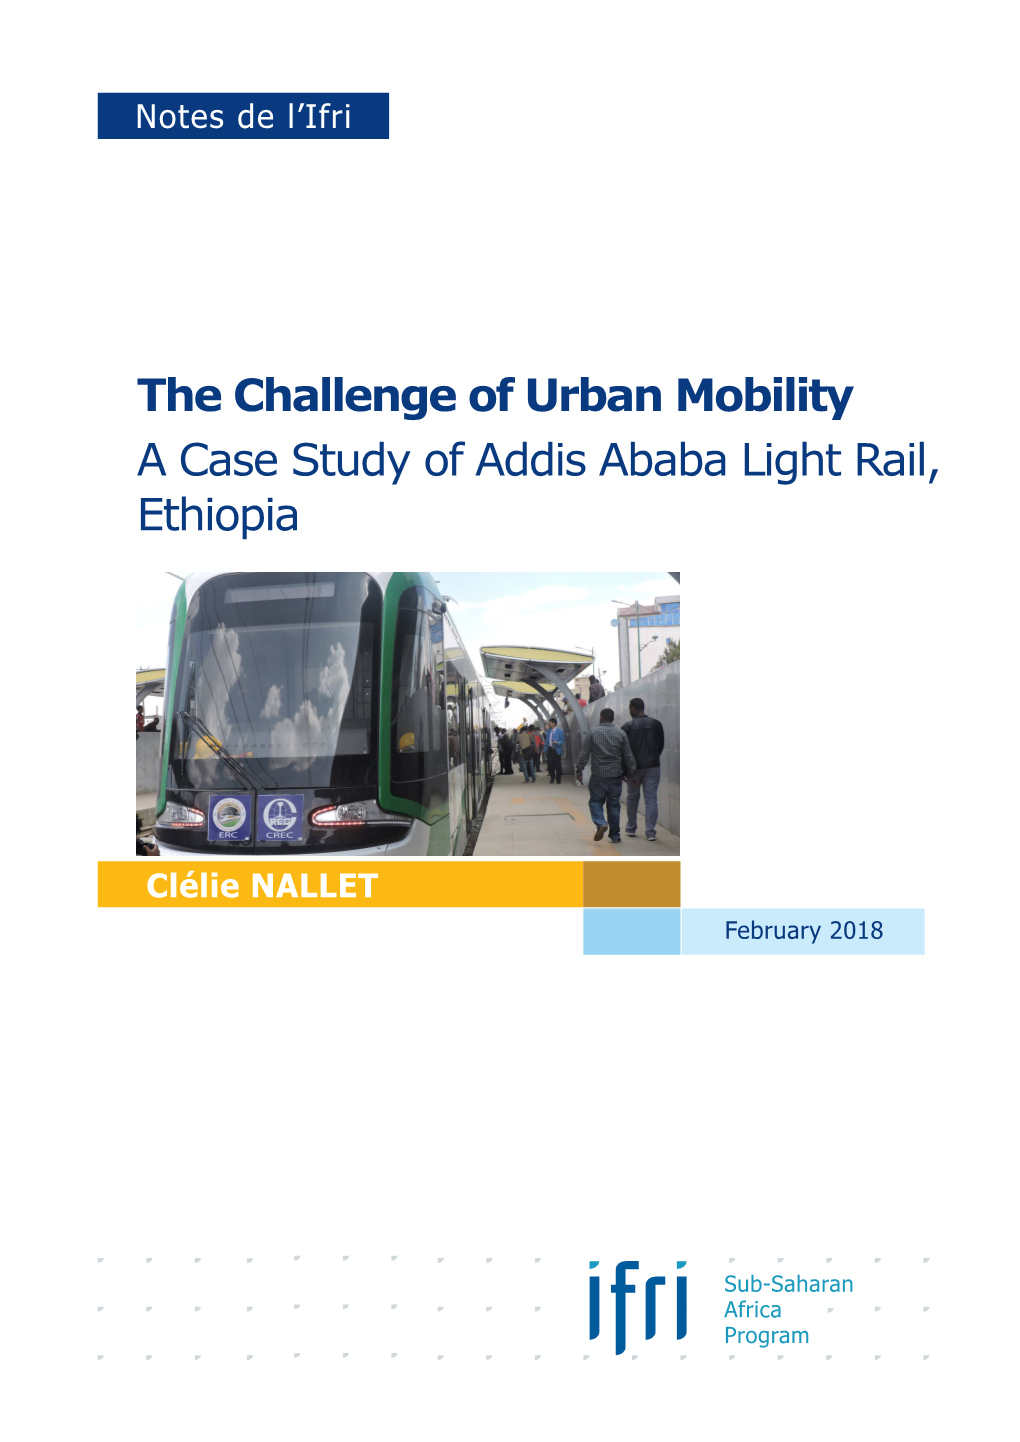 The Challenge of Urban Mobility: a Case Study of Addis Ababa Light Rail, Ethiopia”, Notes De L’Ifri, Ifri, February 2018